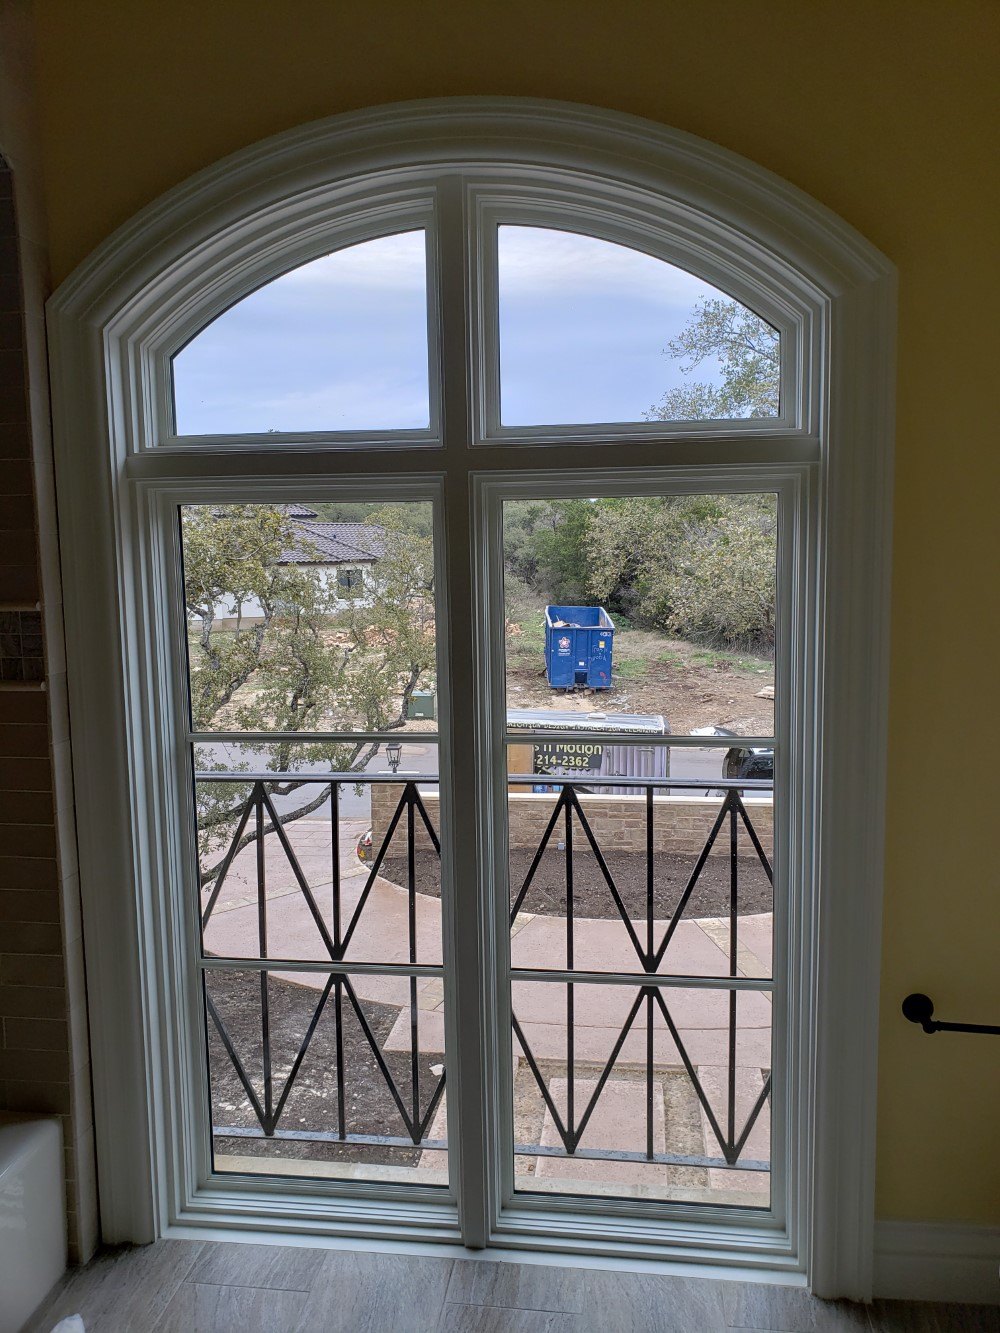 Latest Projects - Elegant Painted Wood Shutters in Shavano Park, TX